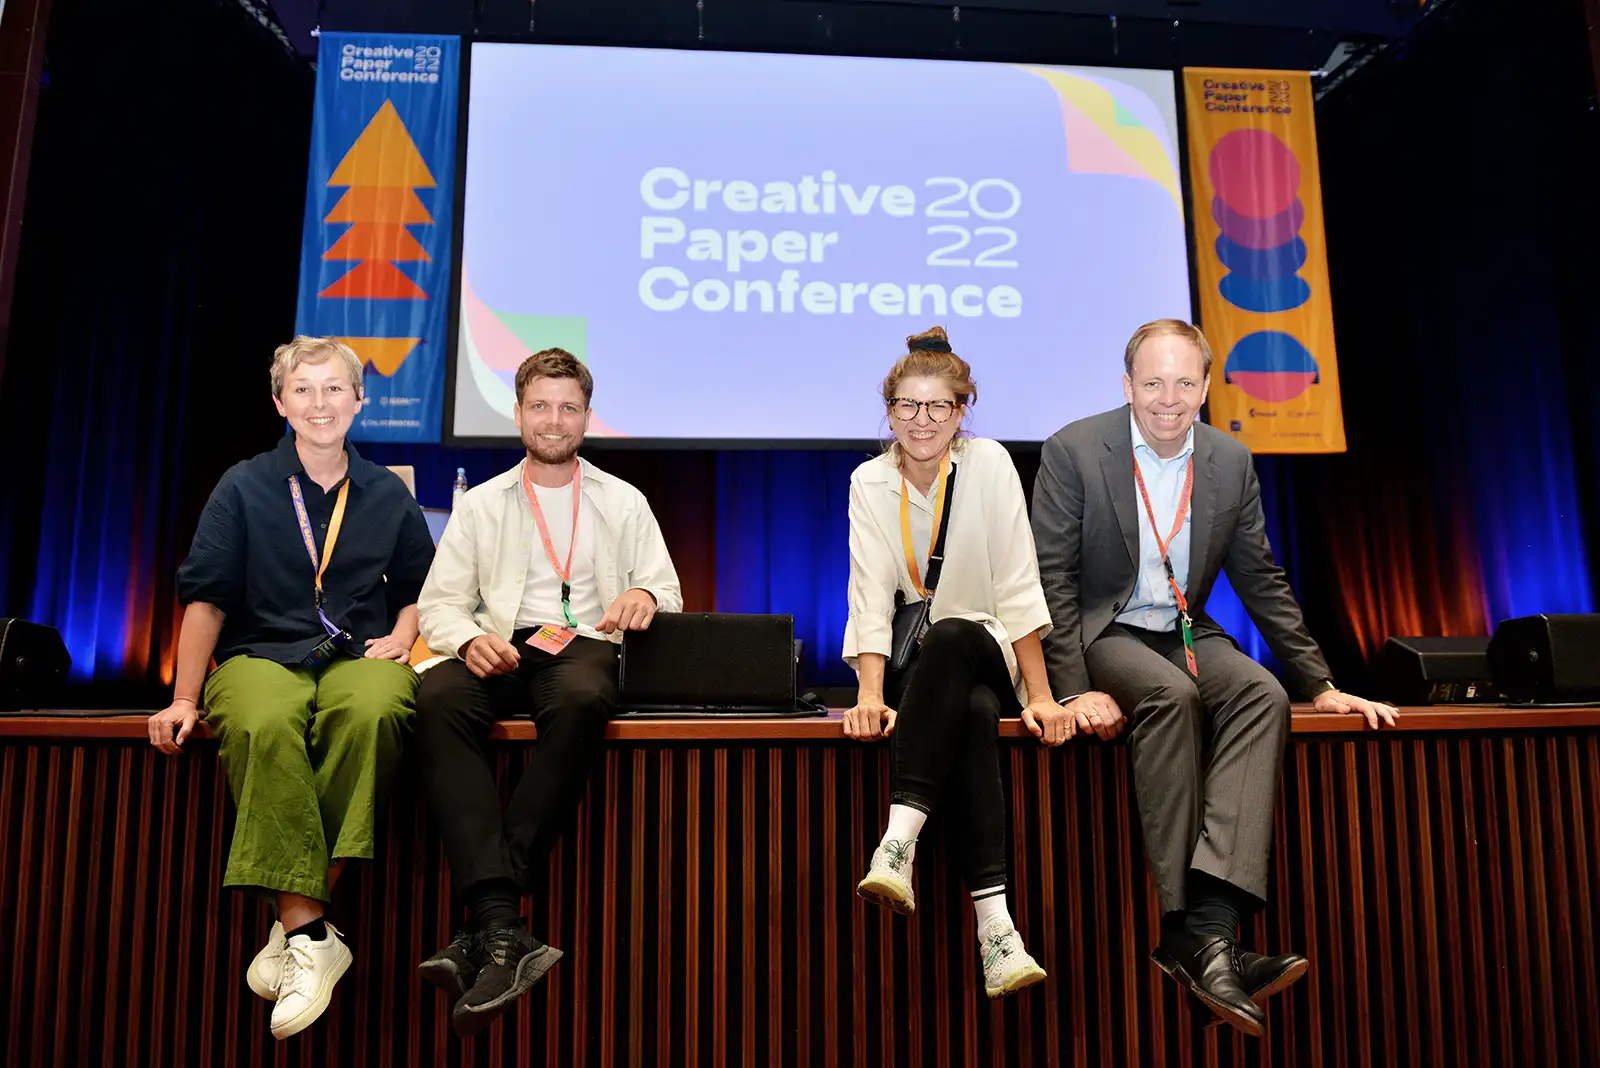 Creative Paper Conference 2022 Team